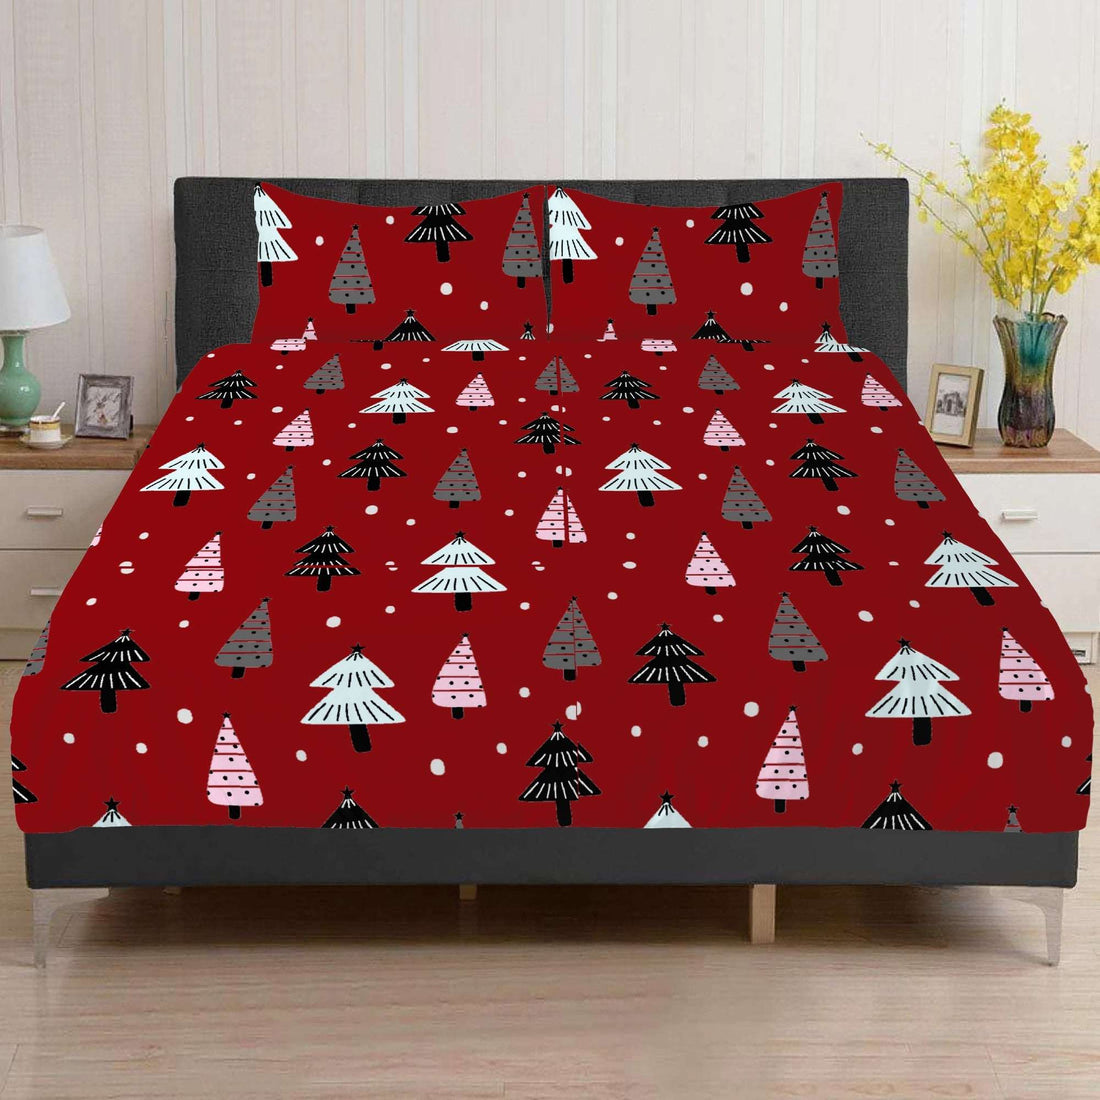 Bedding Red with Christmas trees Home-clothes-jewelry